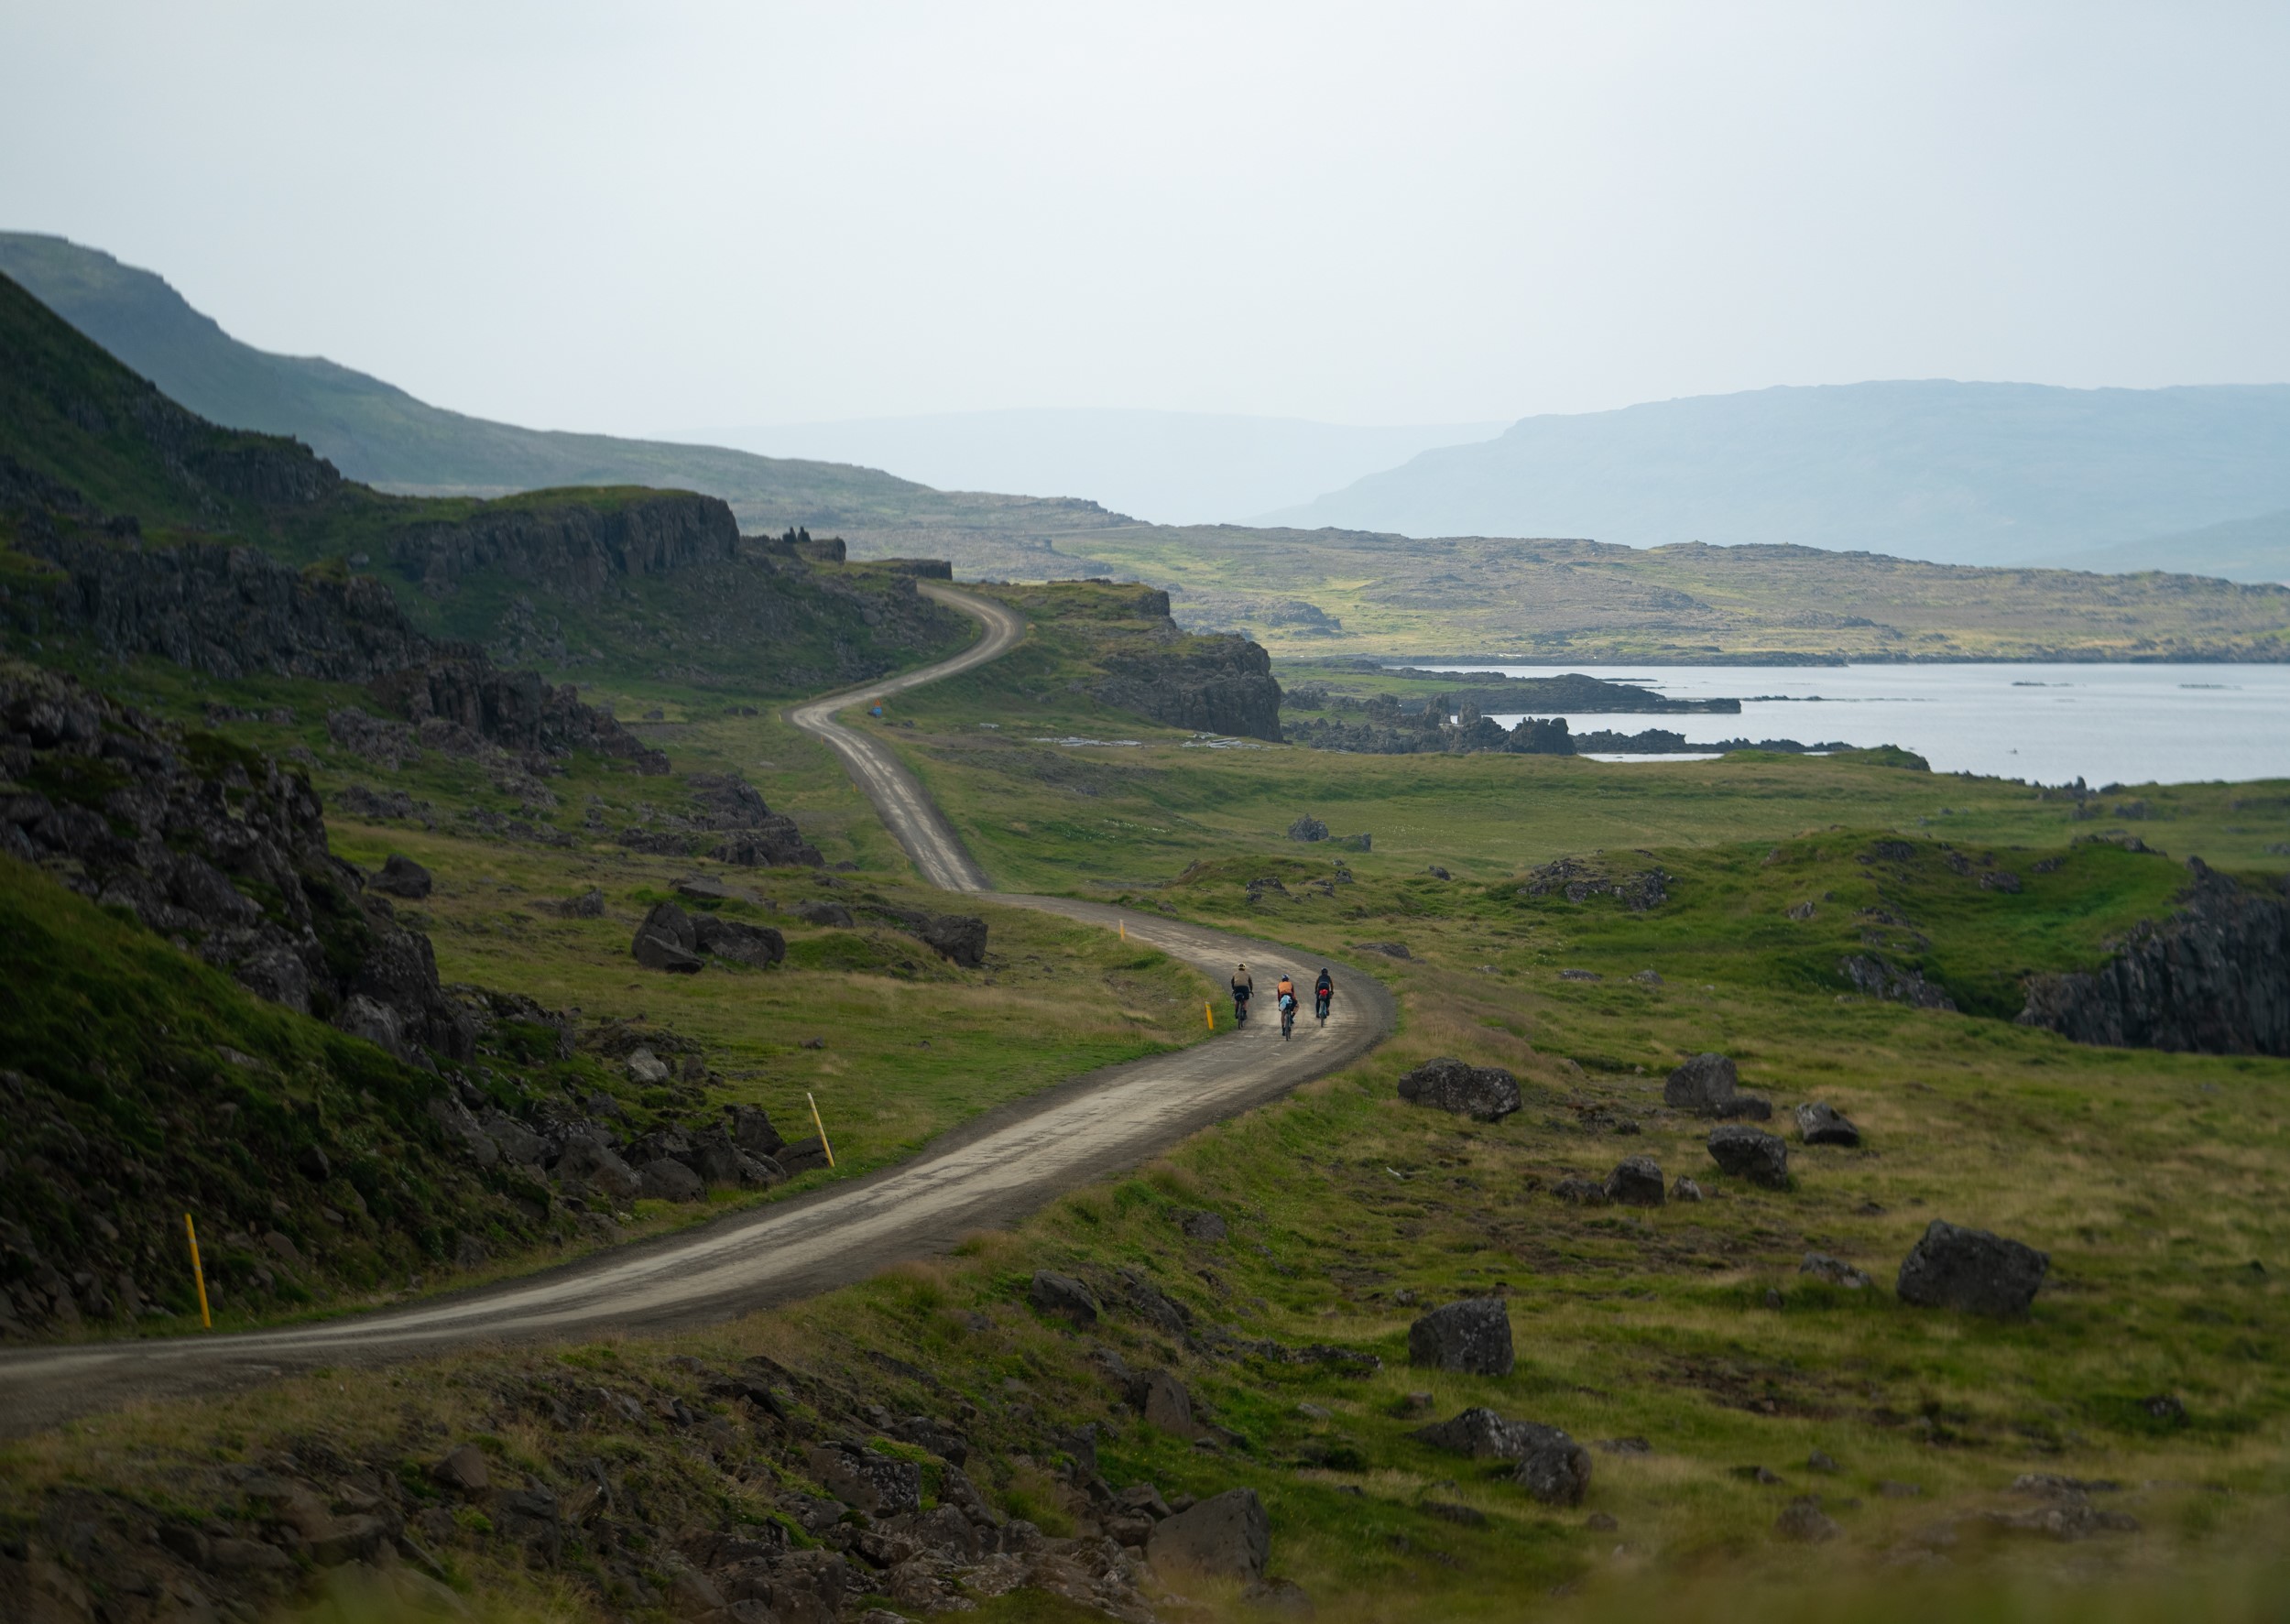 Cyclists on a gravel road by the edge of a fjord in the Westfjords